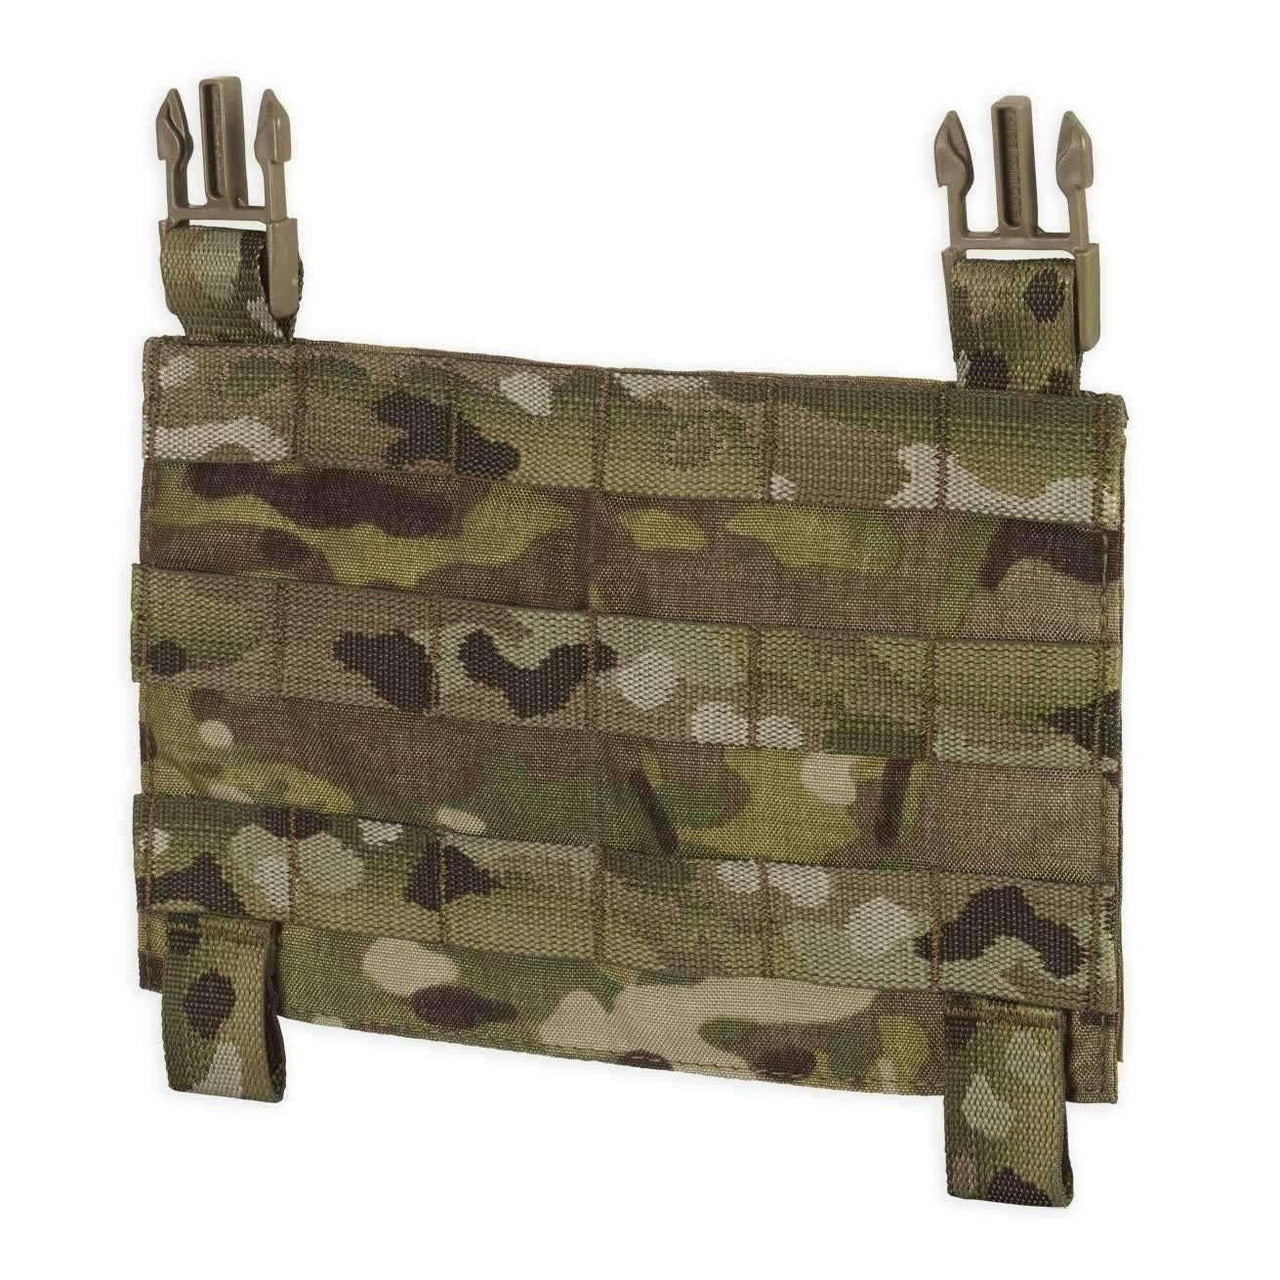 Chase Tactical MOLLE clip Placcard - Vendor